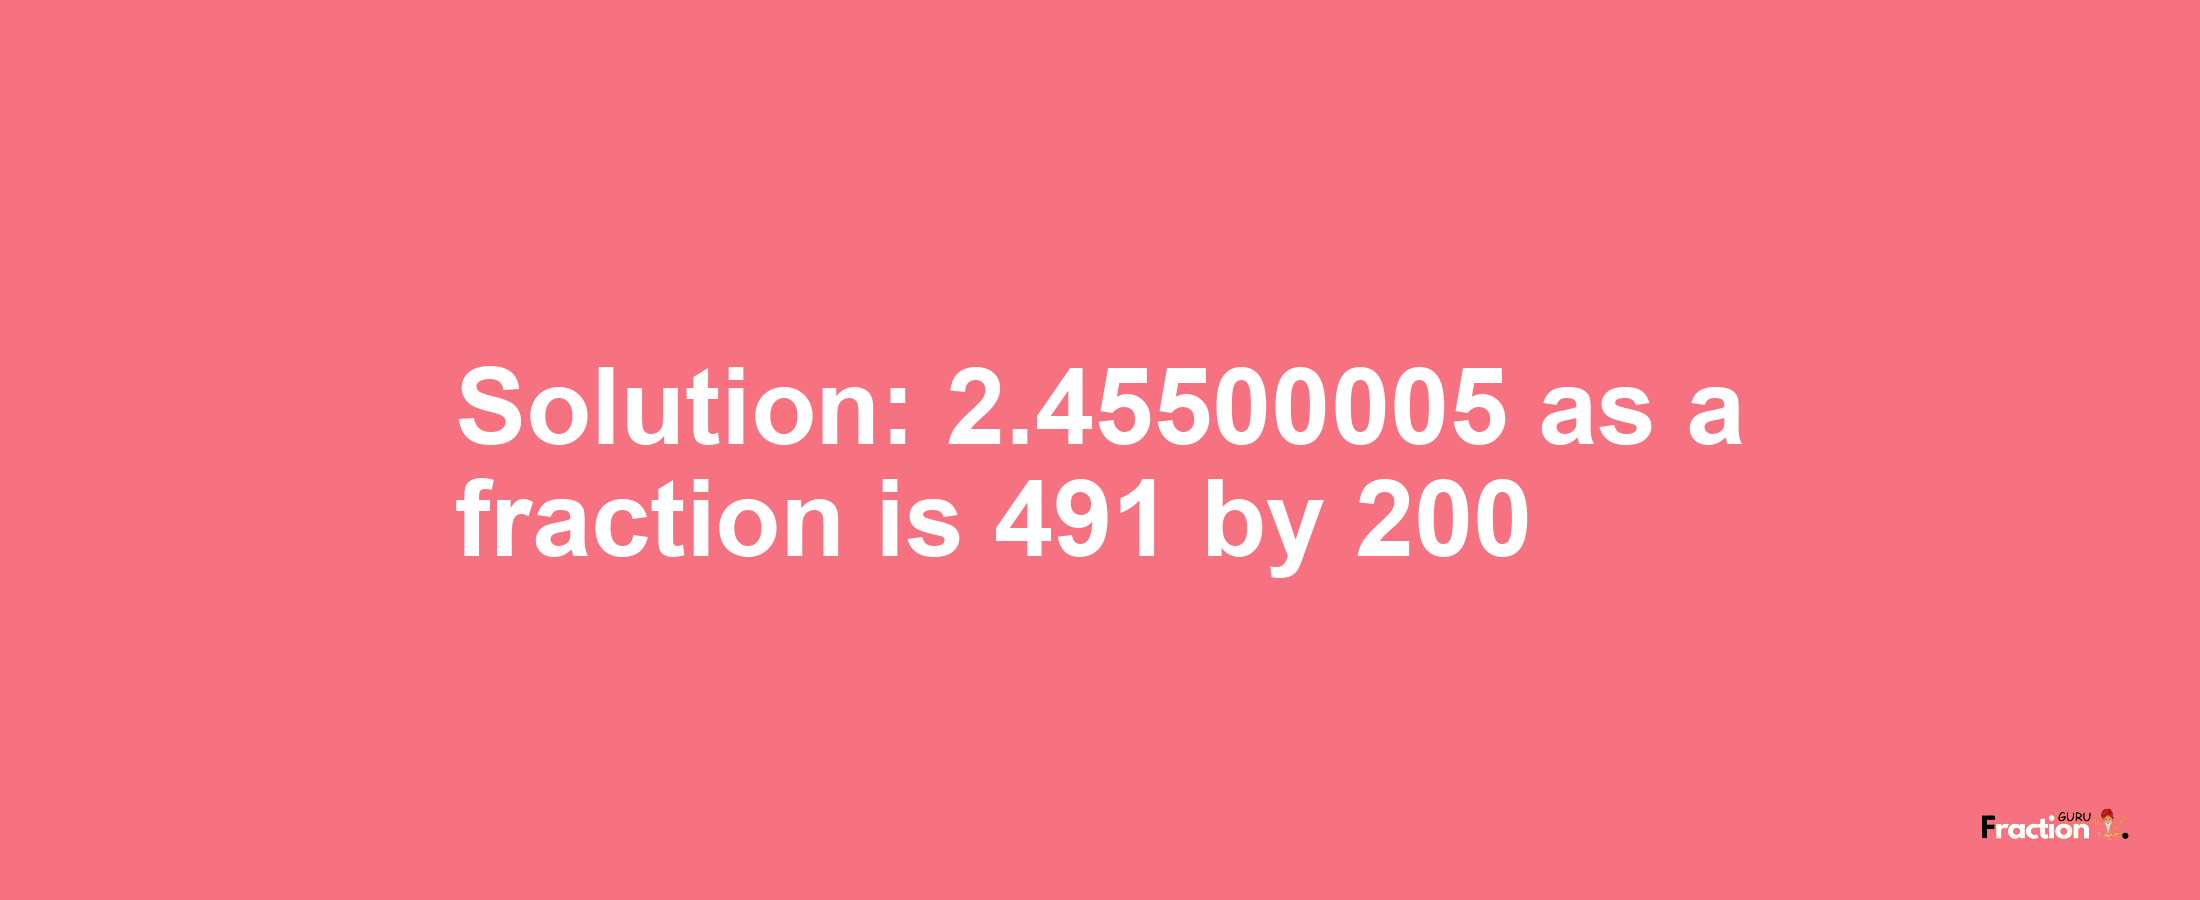 Solution:2.45500005 as a fraction is 491/200